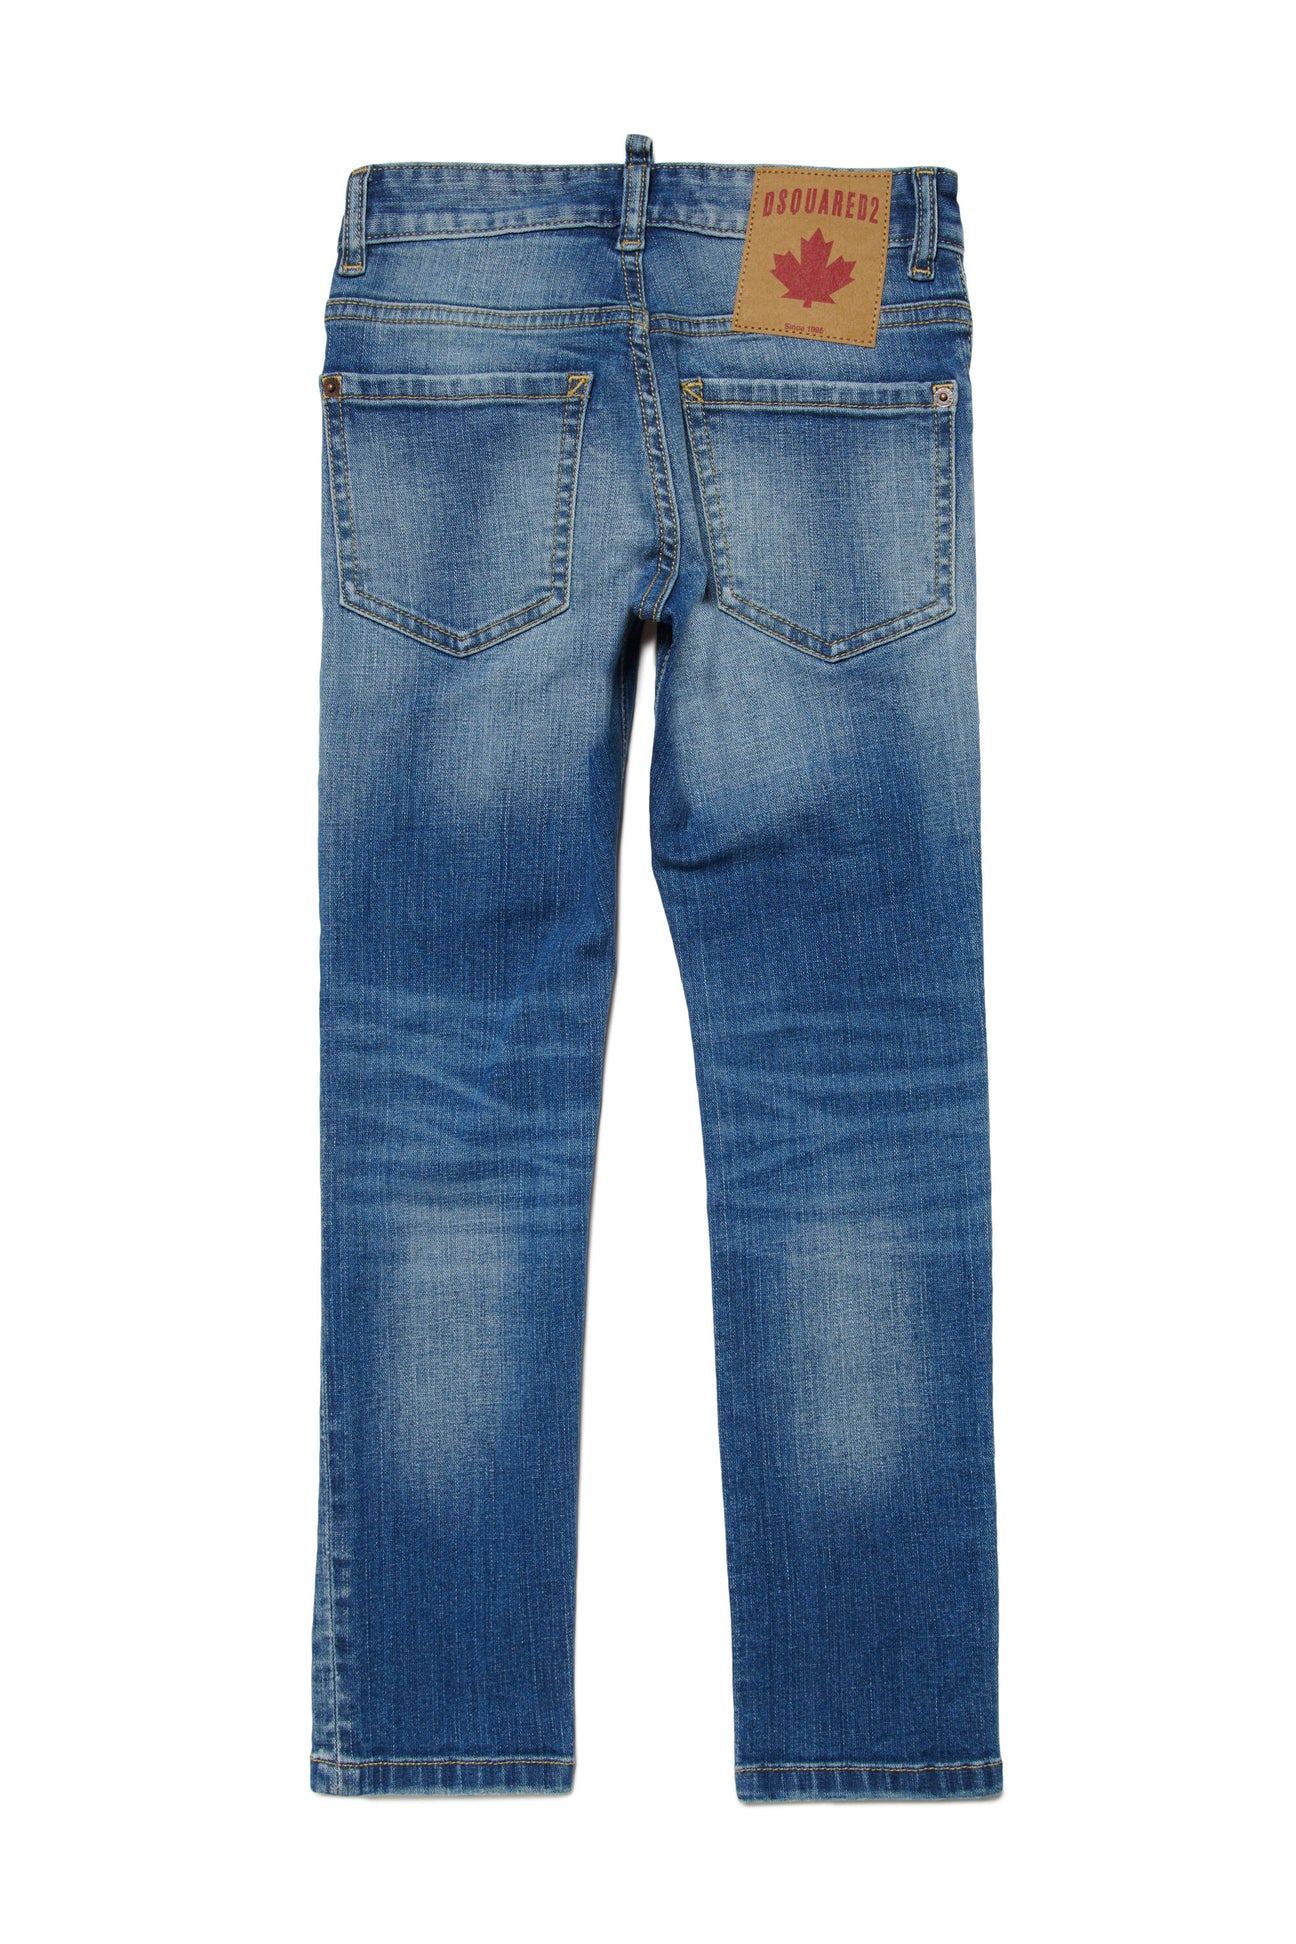 Shaded blue skinny jeans - Cool Guy Shaded blue skinny jeans - Cool Guy